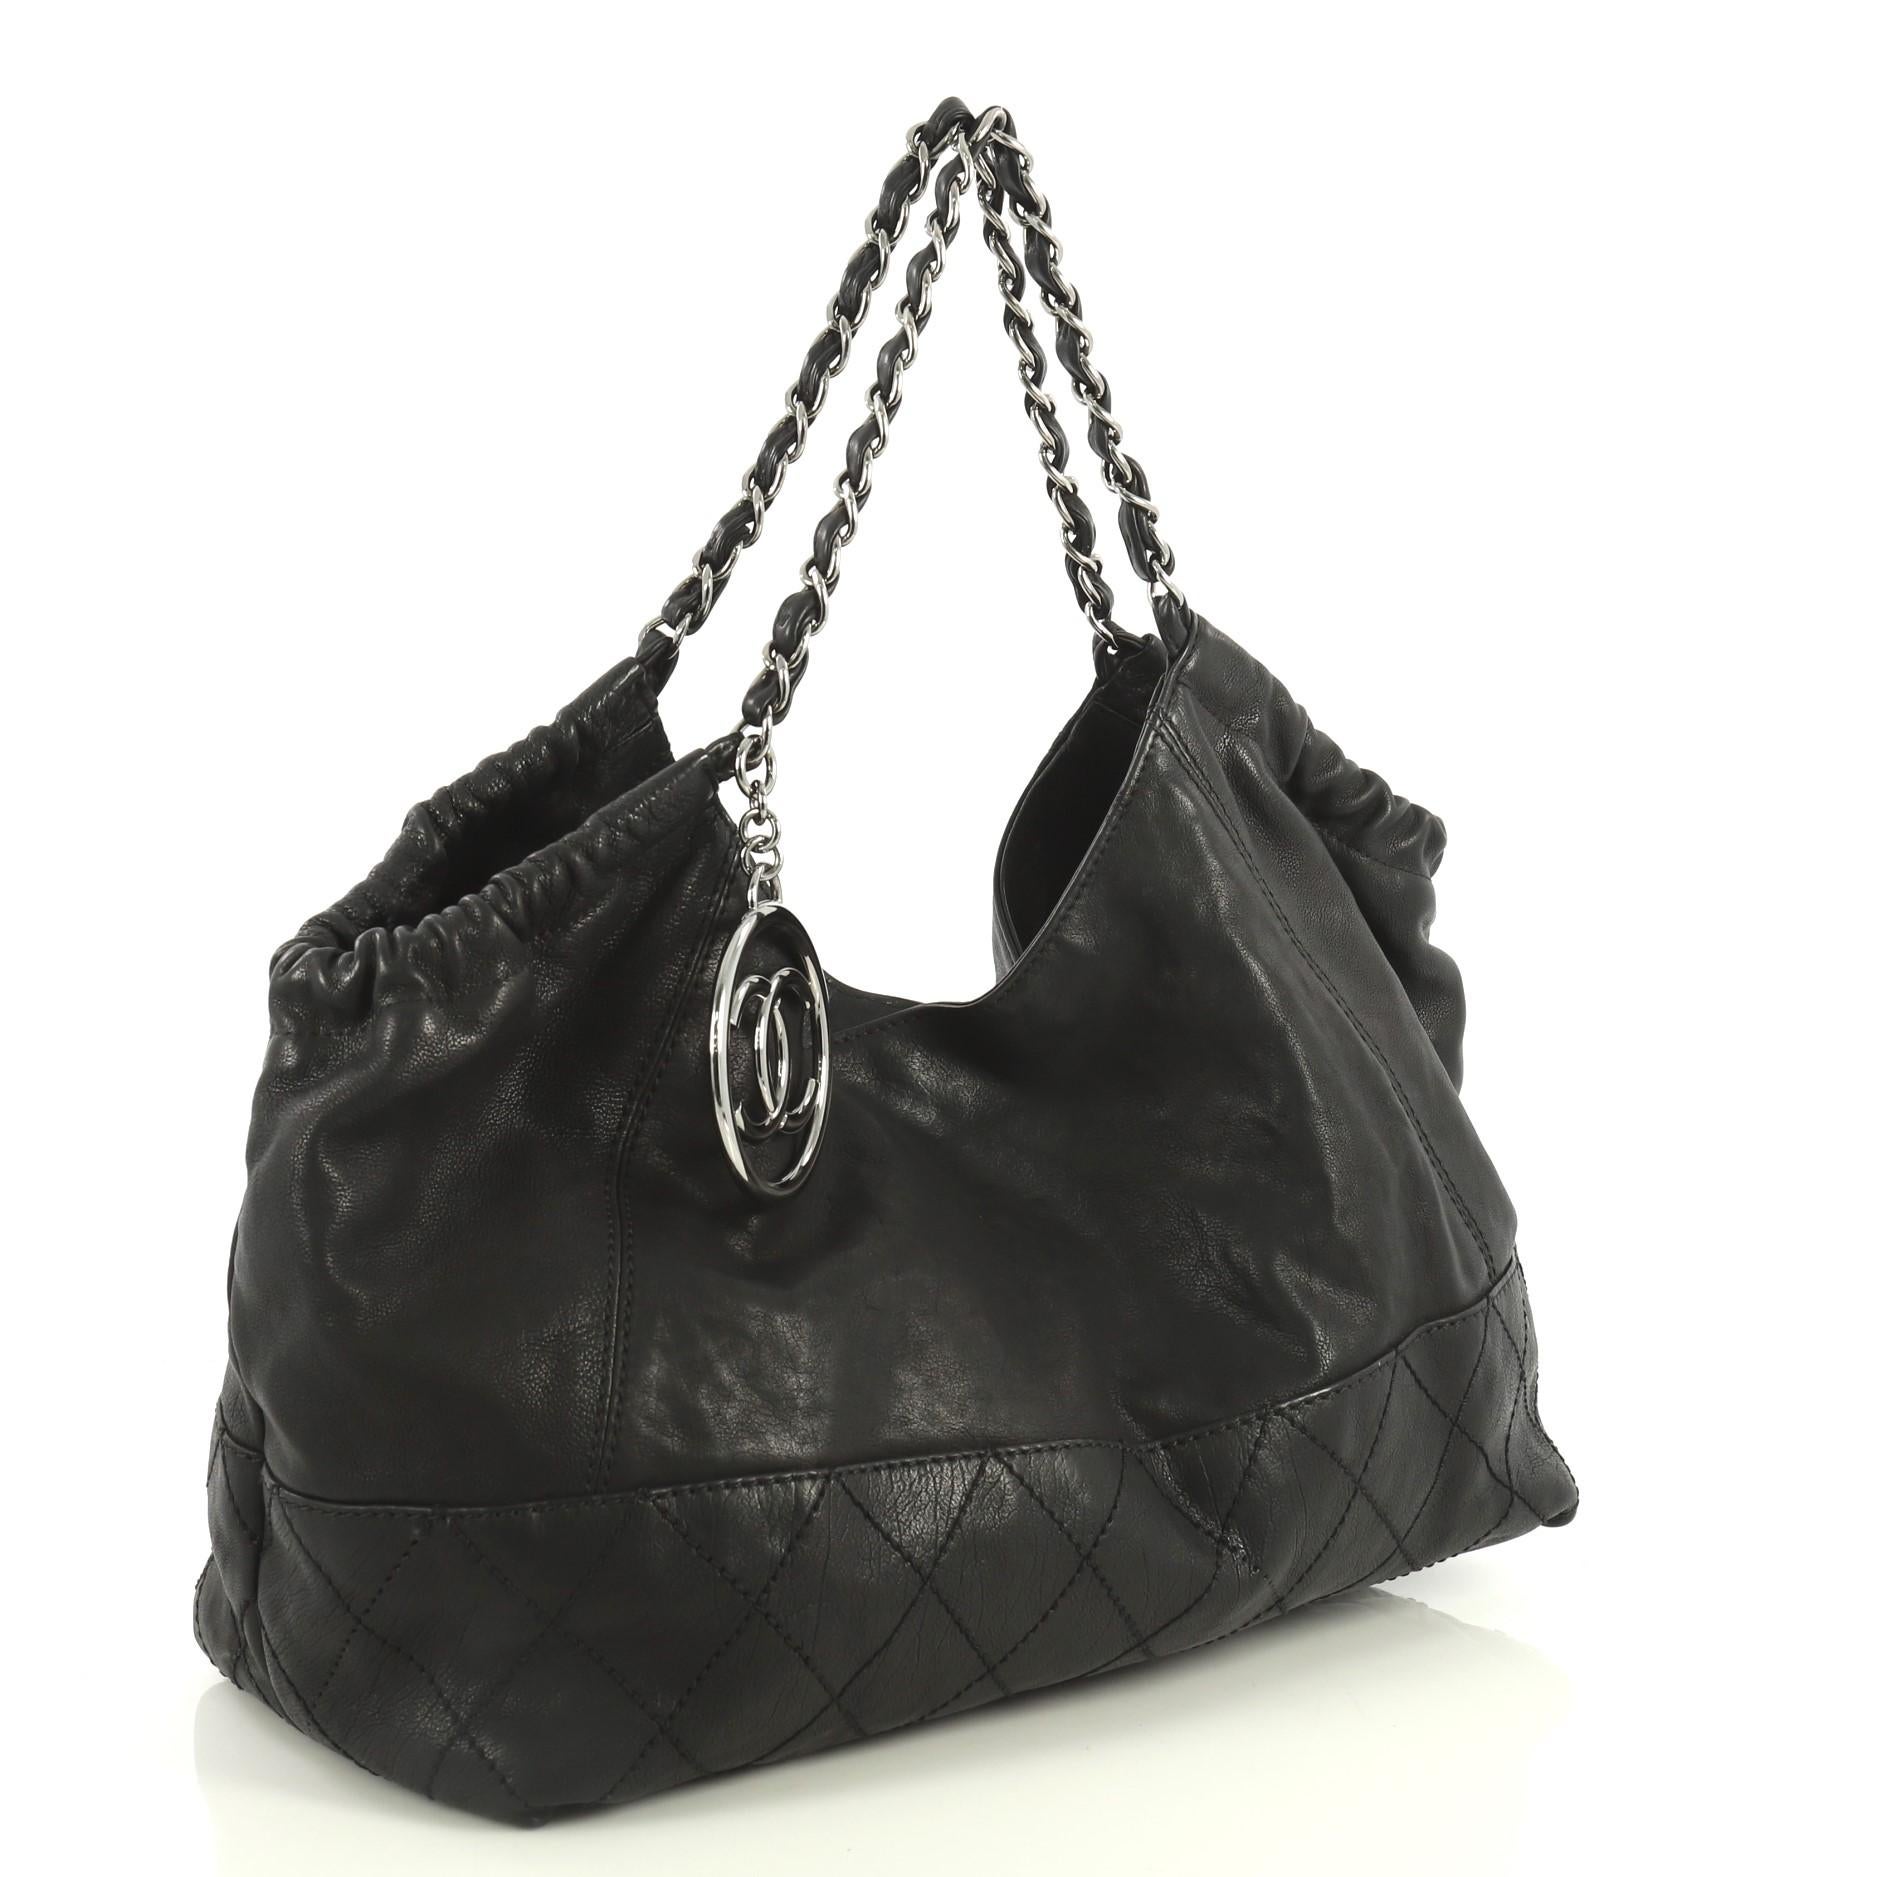 This Chanel Baby Coco Cabas Quilted Leather Large, crafted in black quilted leather, features woven-in leather chain handles and silver-tone hardware. Its magnetic snap closure opens to a black suede interior with slip and zip pockets. Hologram